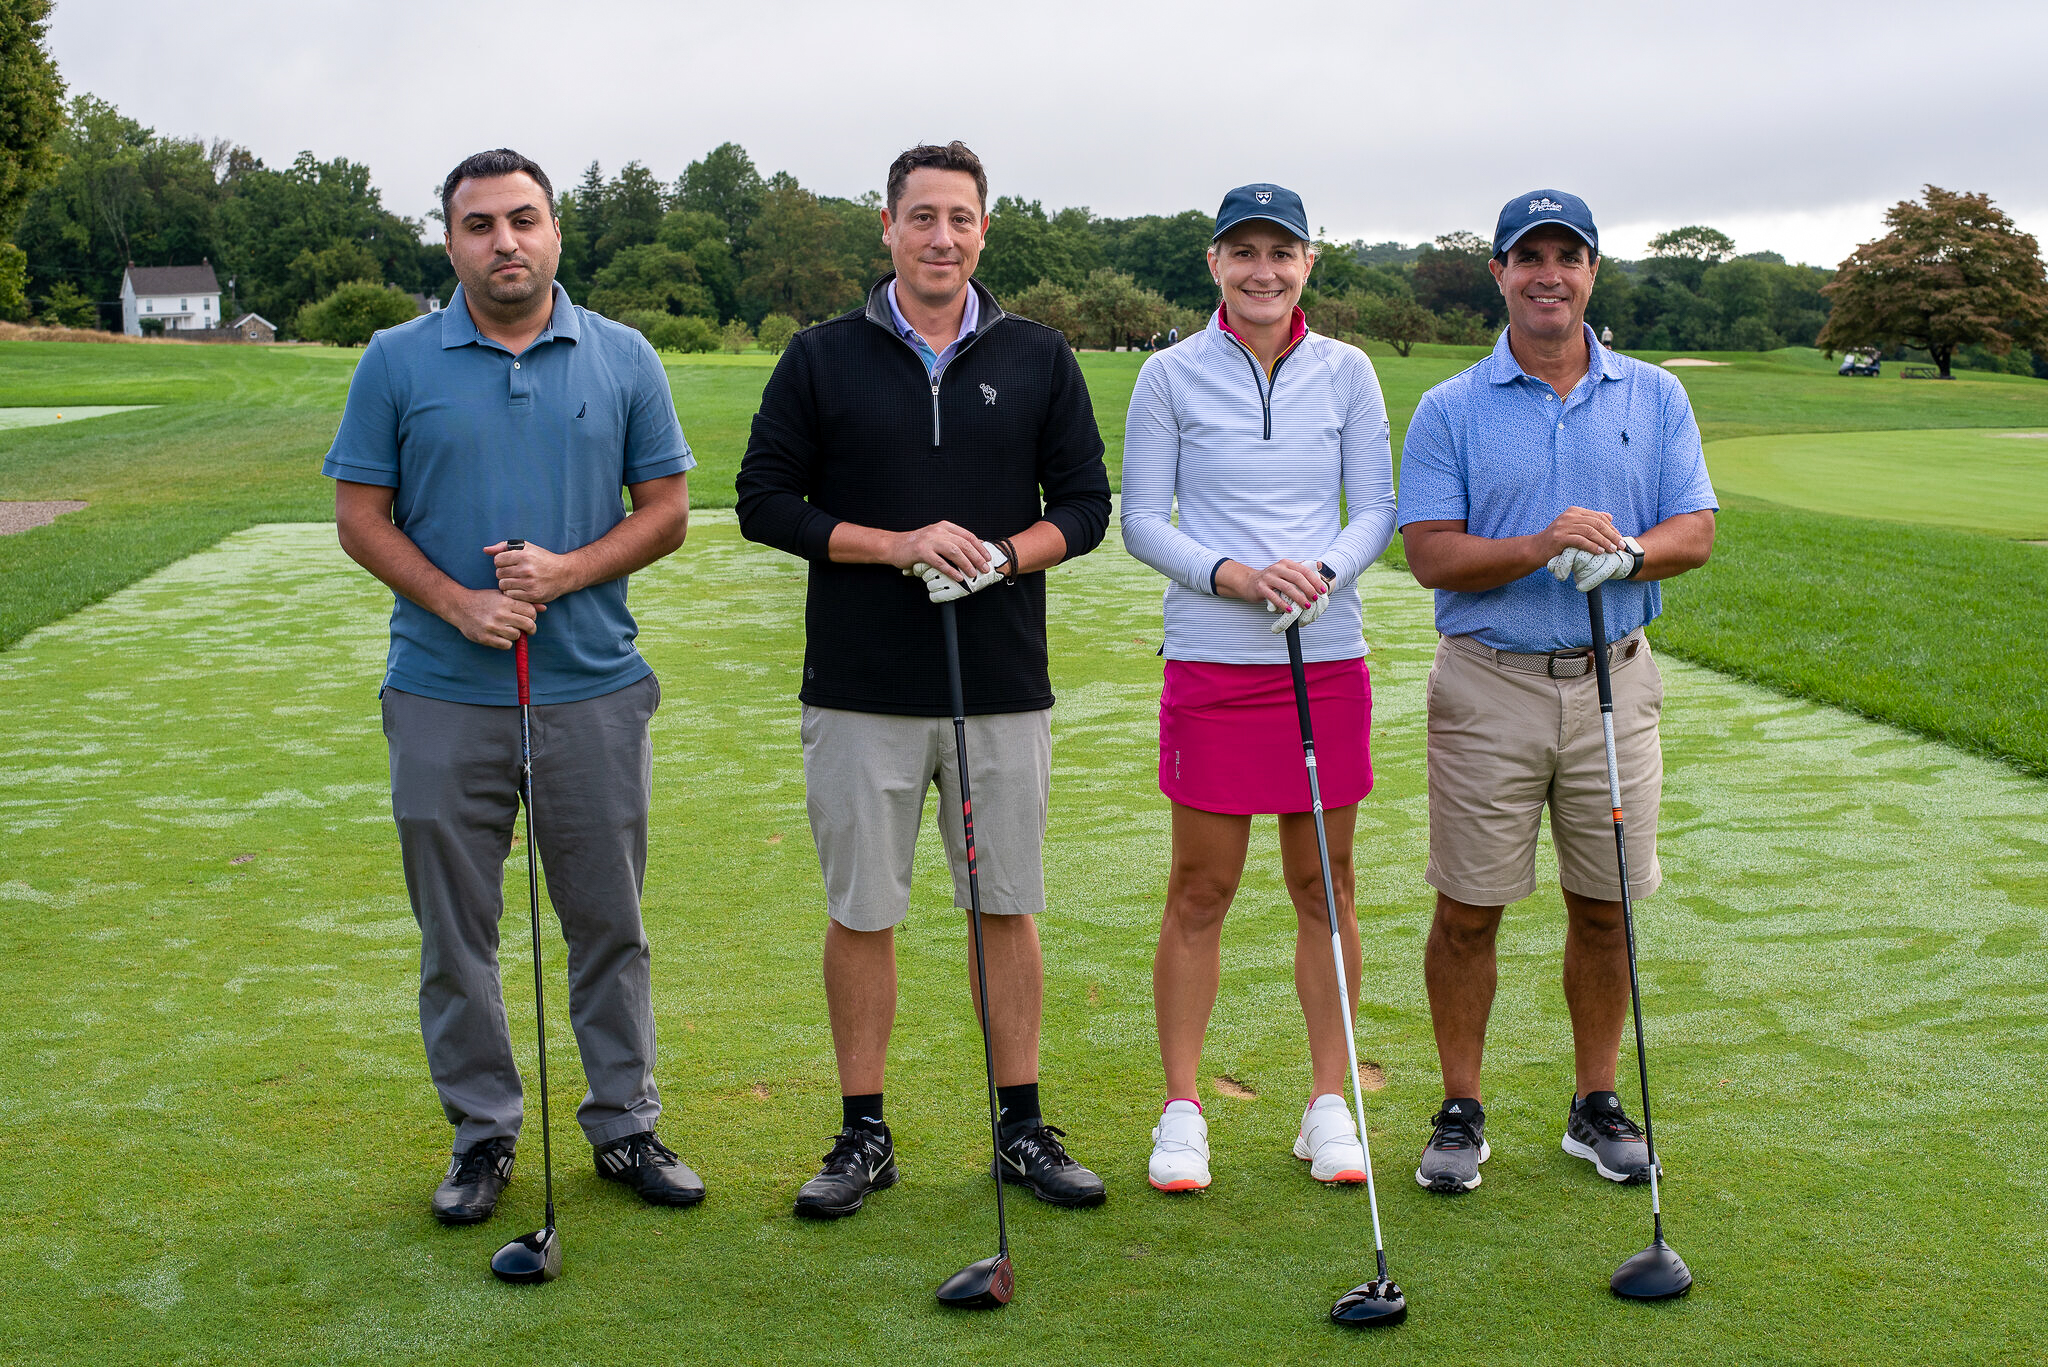 Four people stand with golf clubs, facing the camera, in front of a golf course